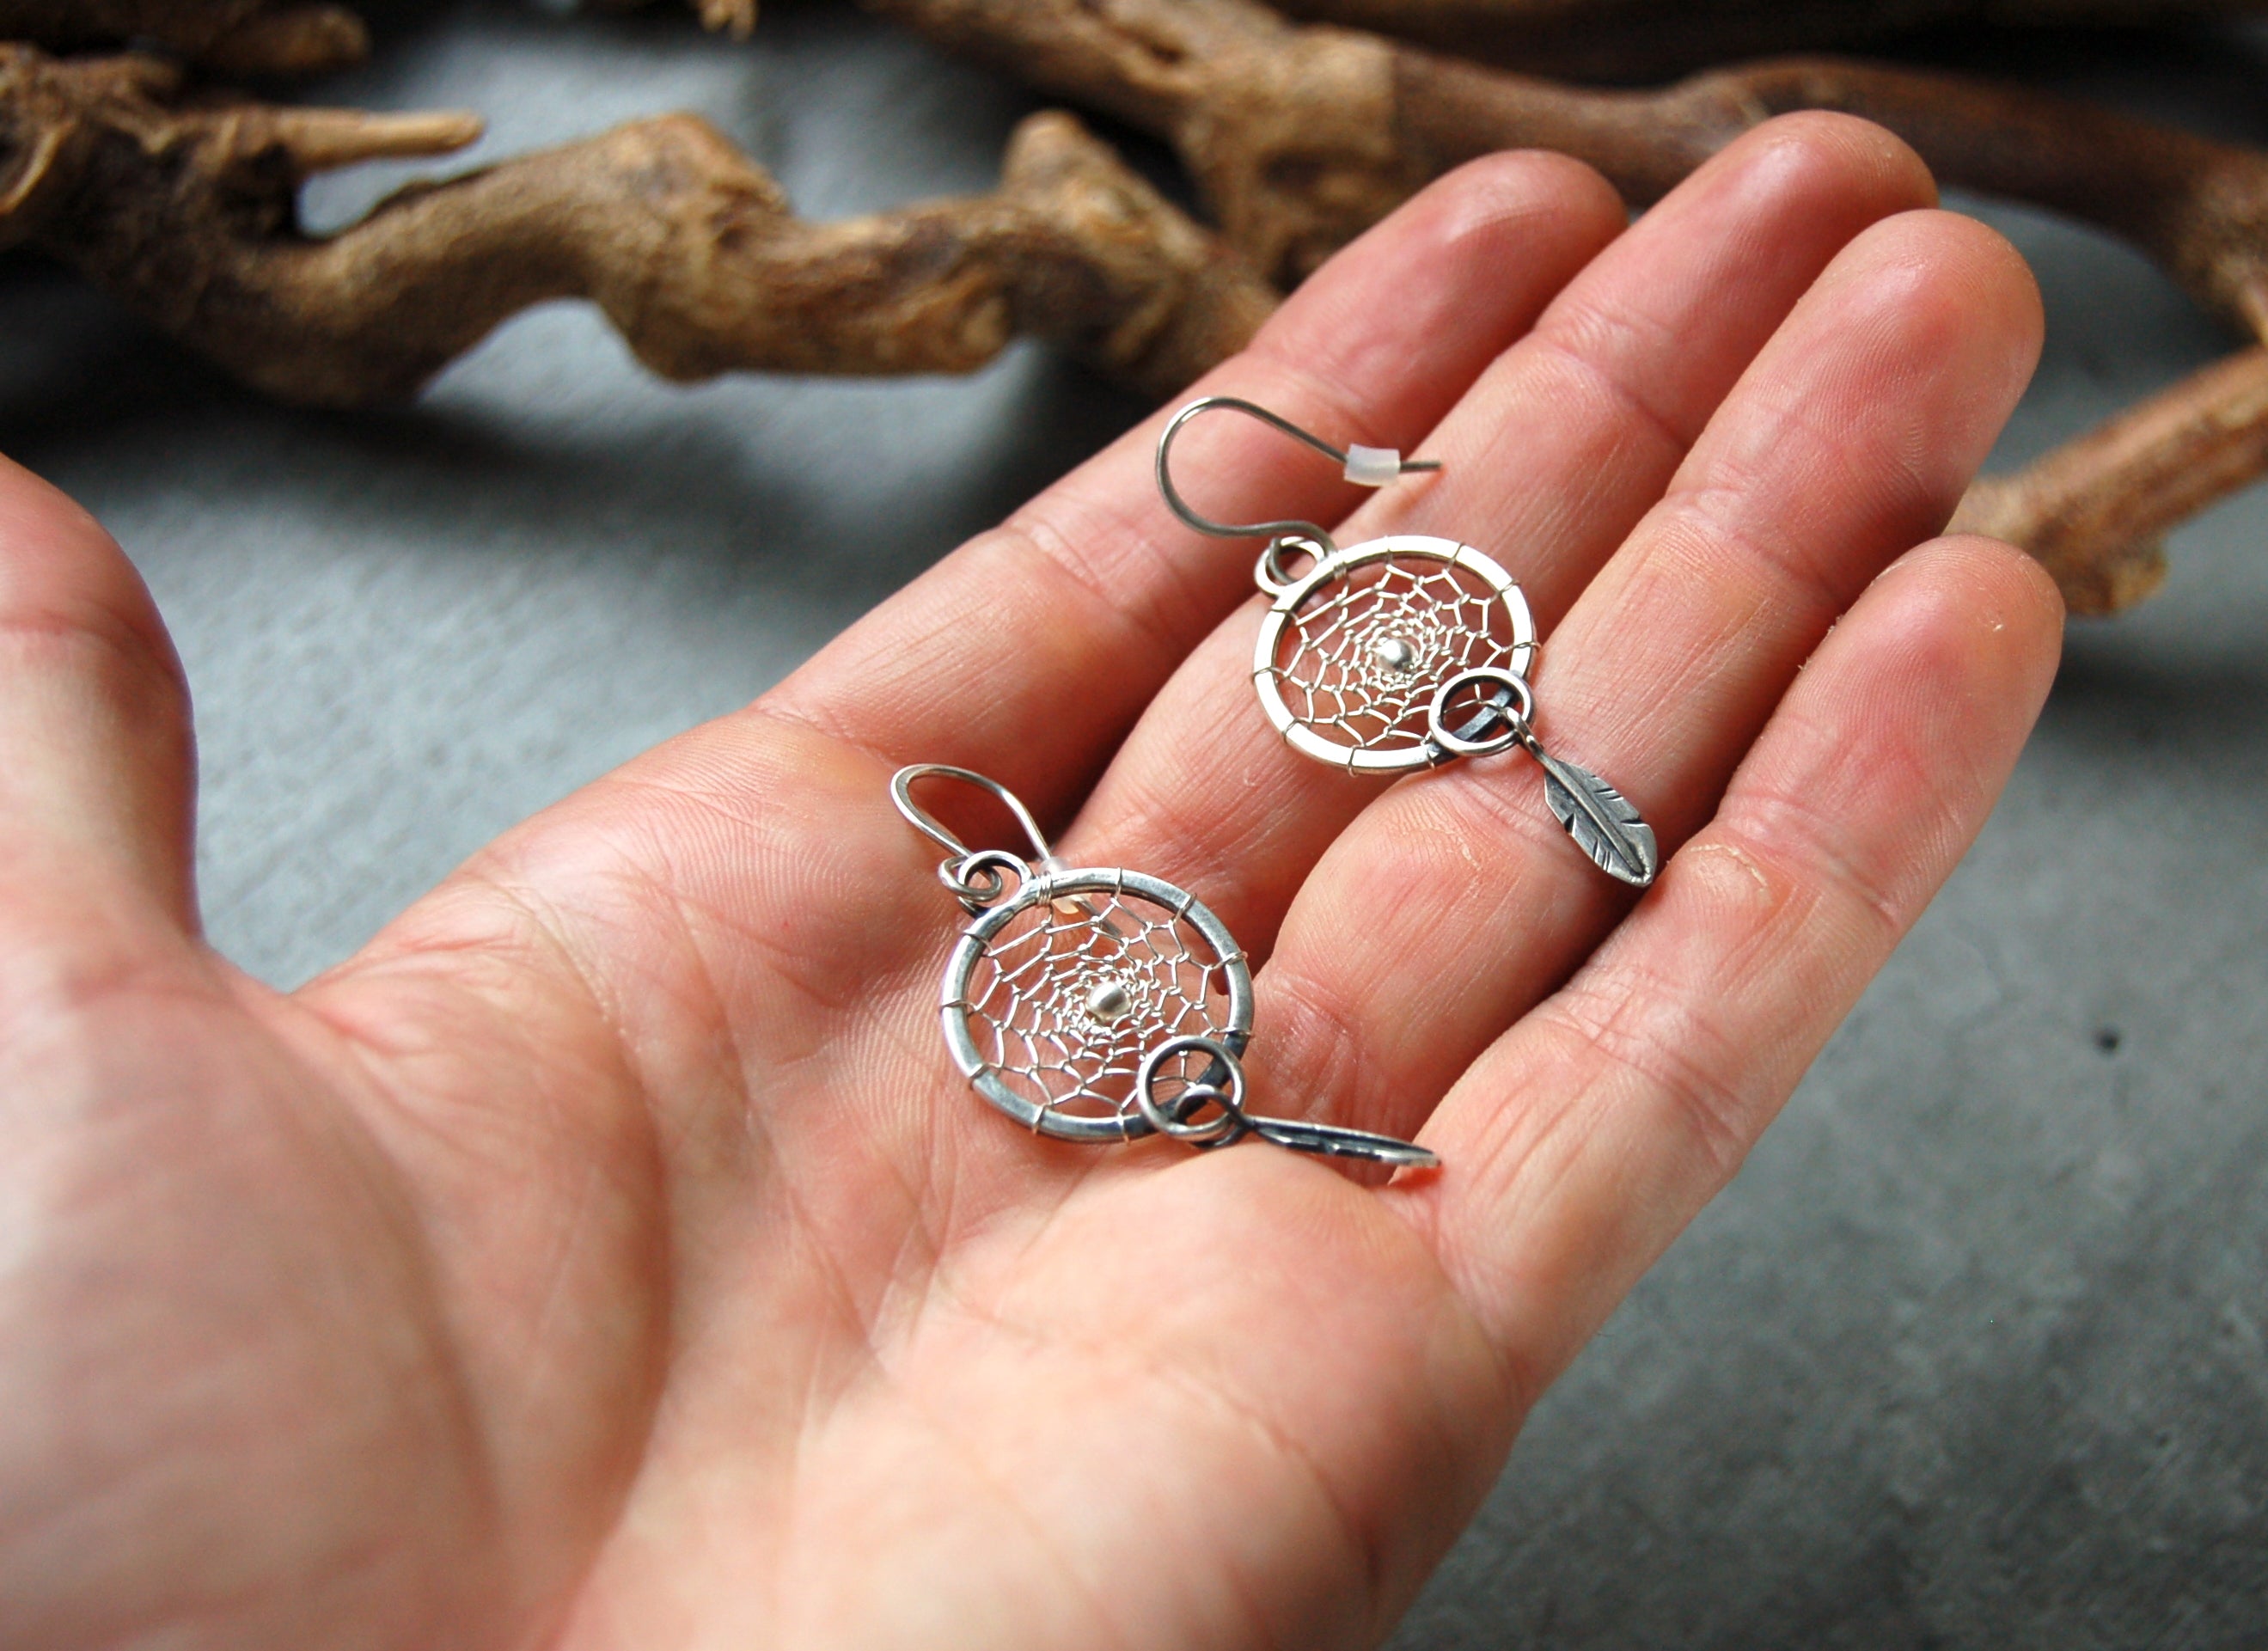 Daisy Jewels — Silver or Gold Plated Dream Catcher Earrings